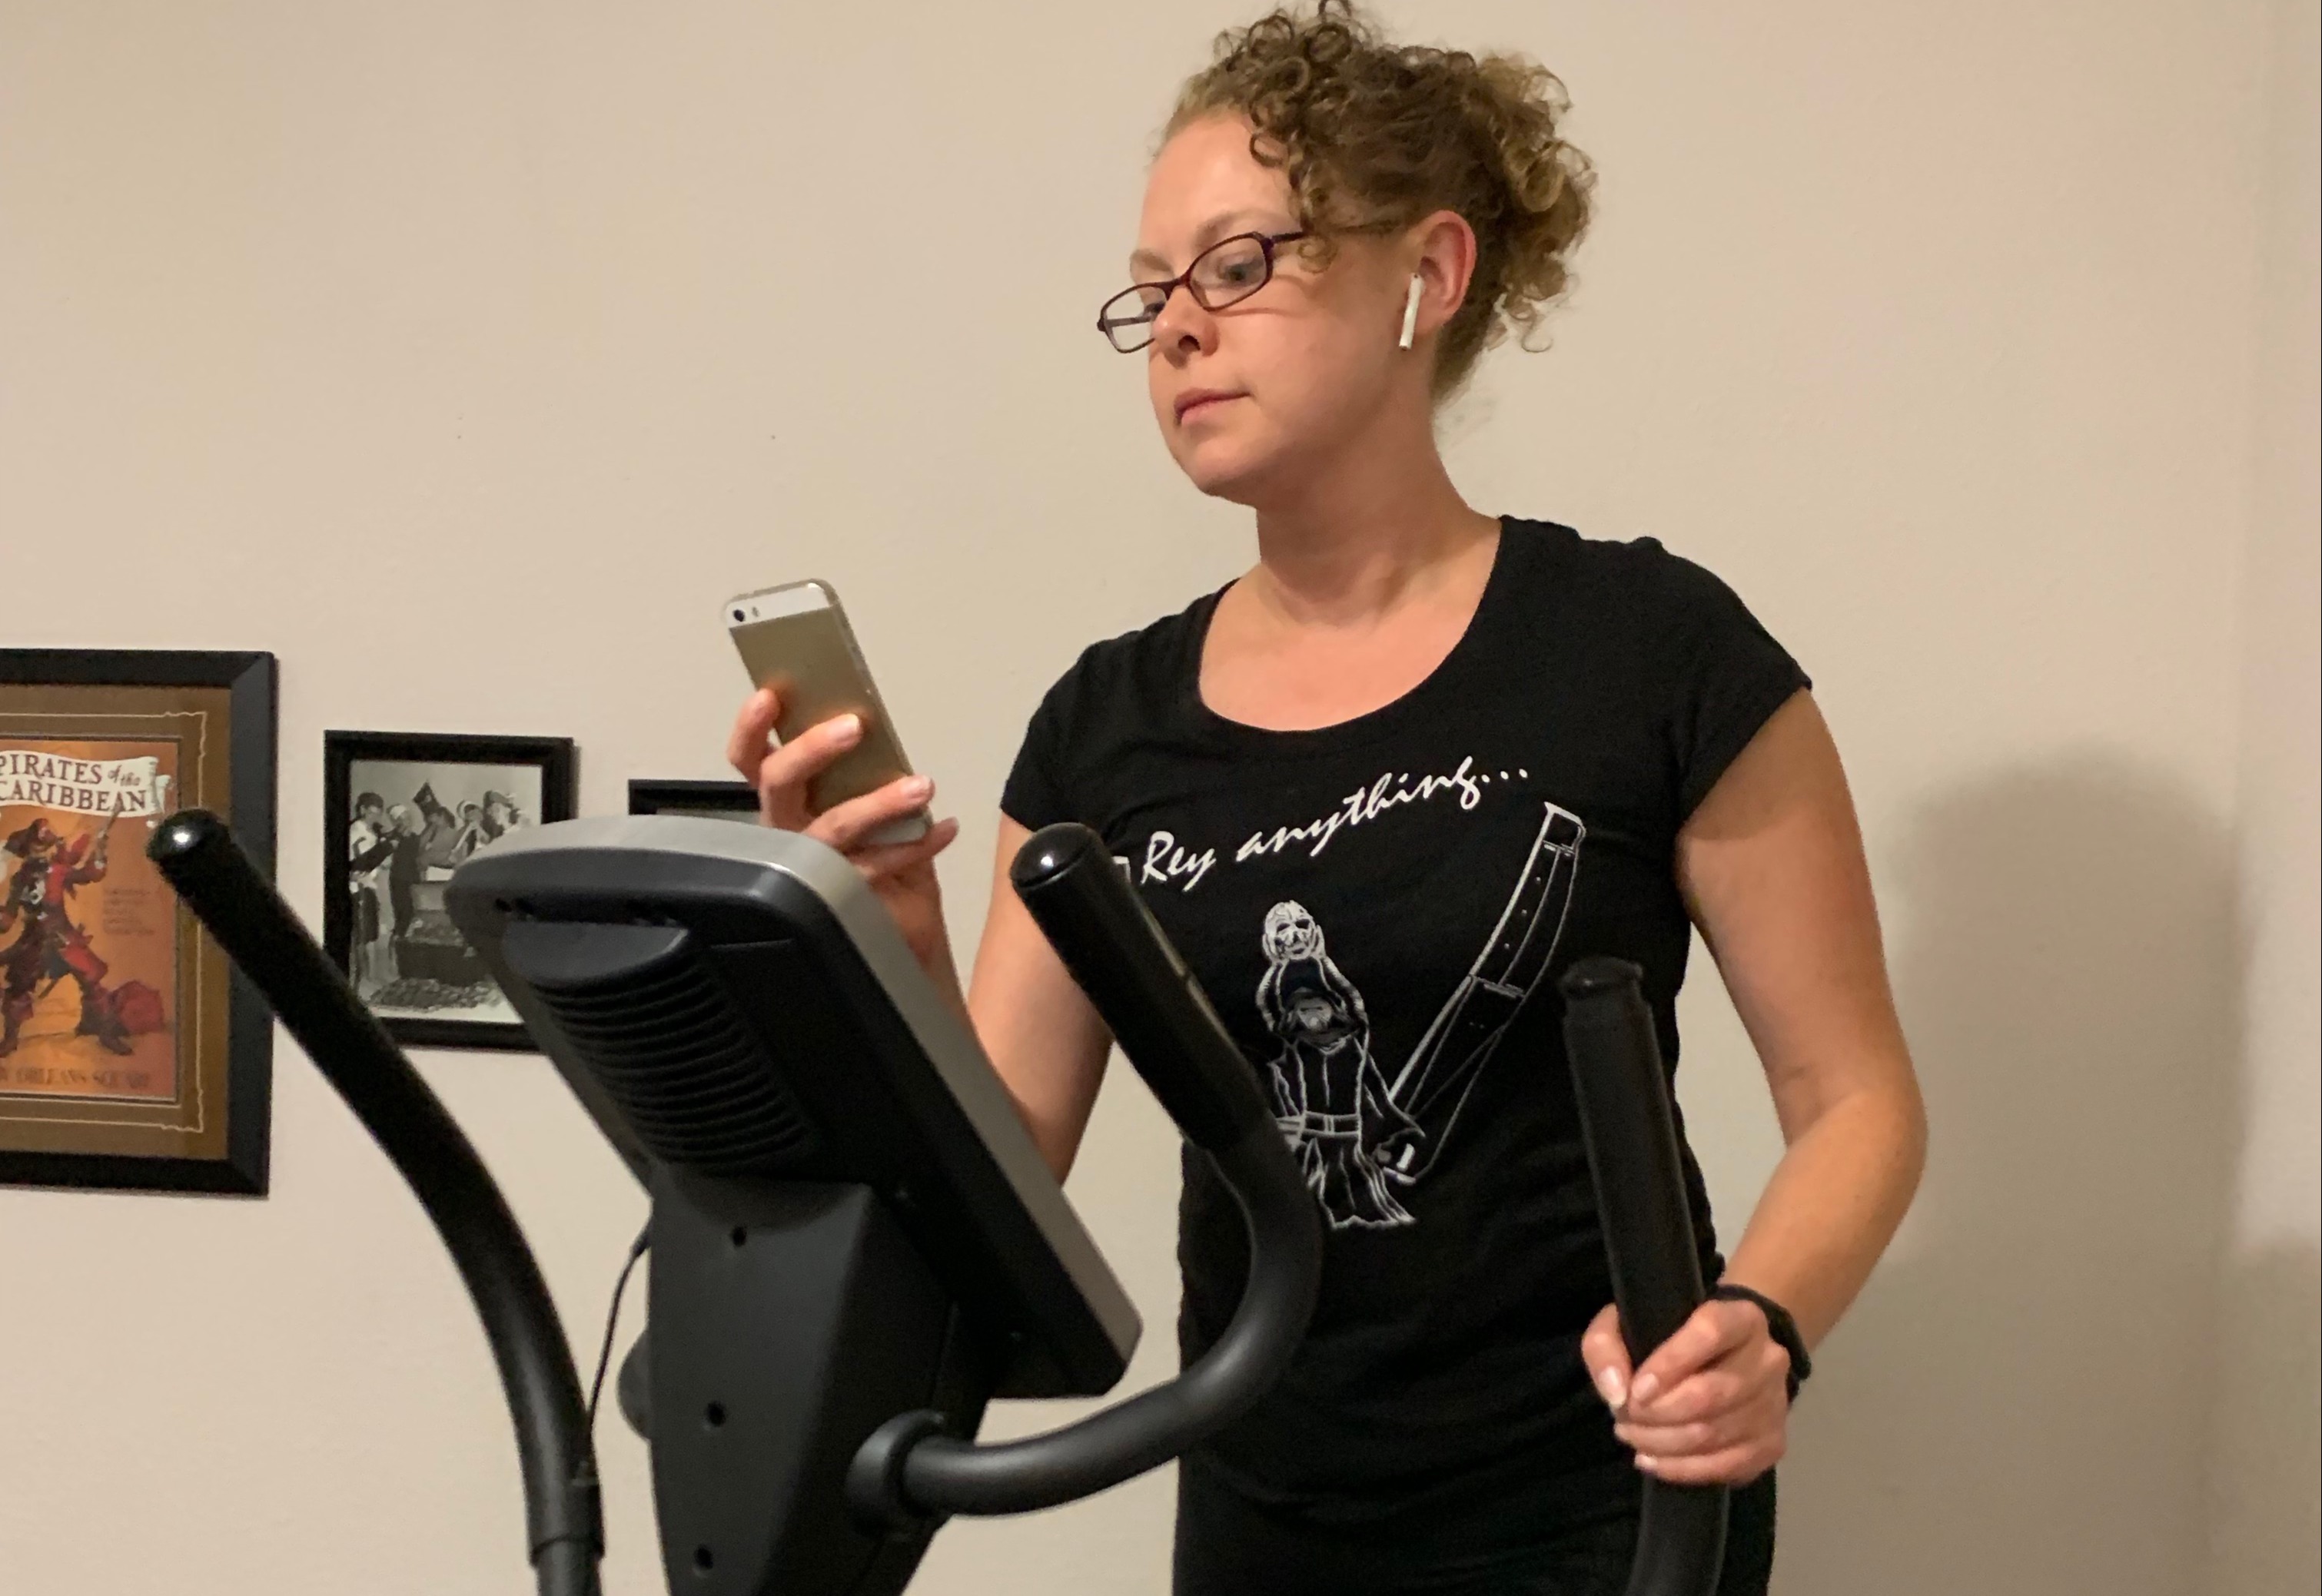 Working out on an Elliptical machine, while working on an iPhone.